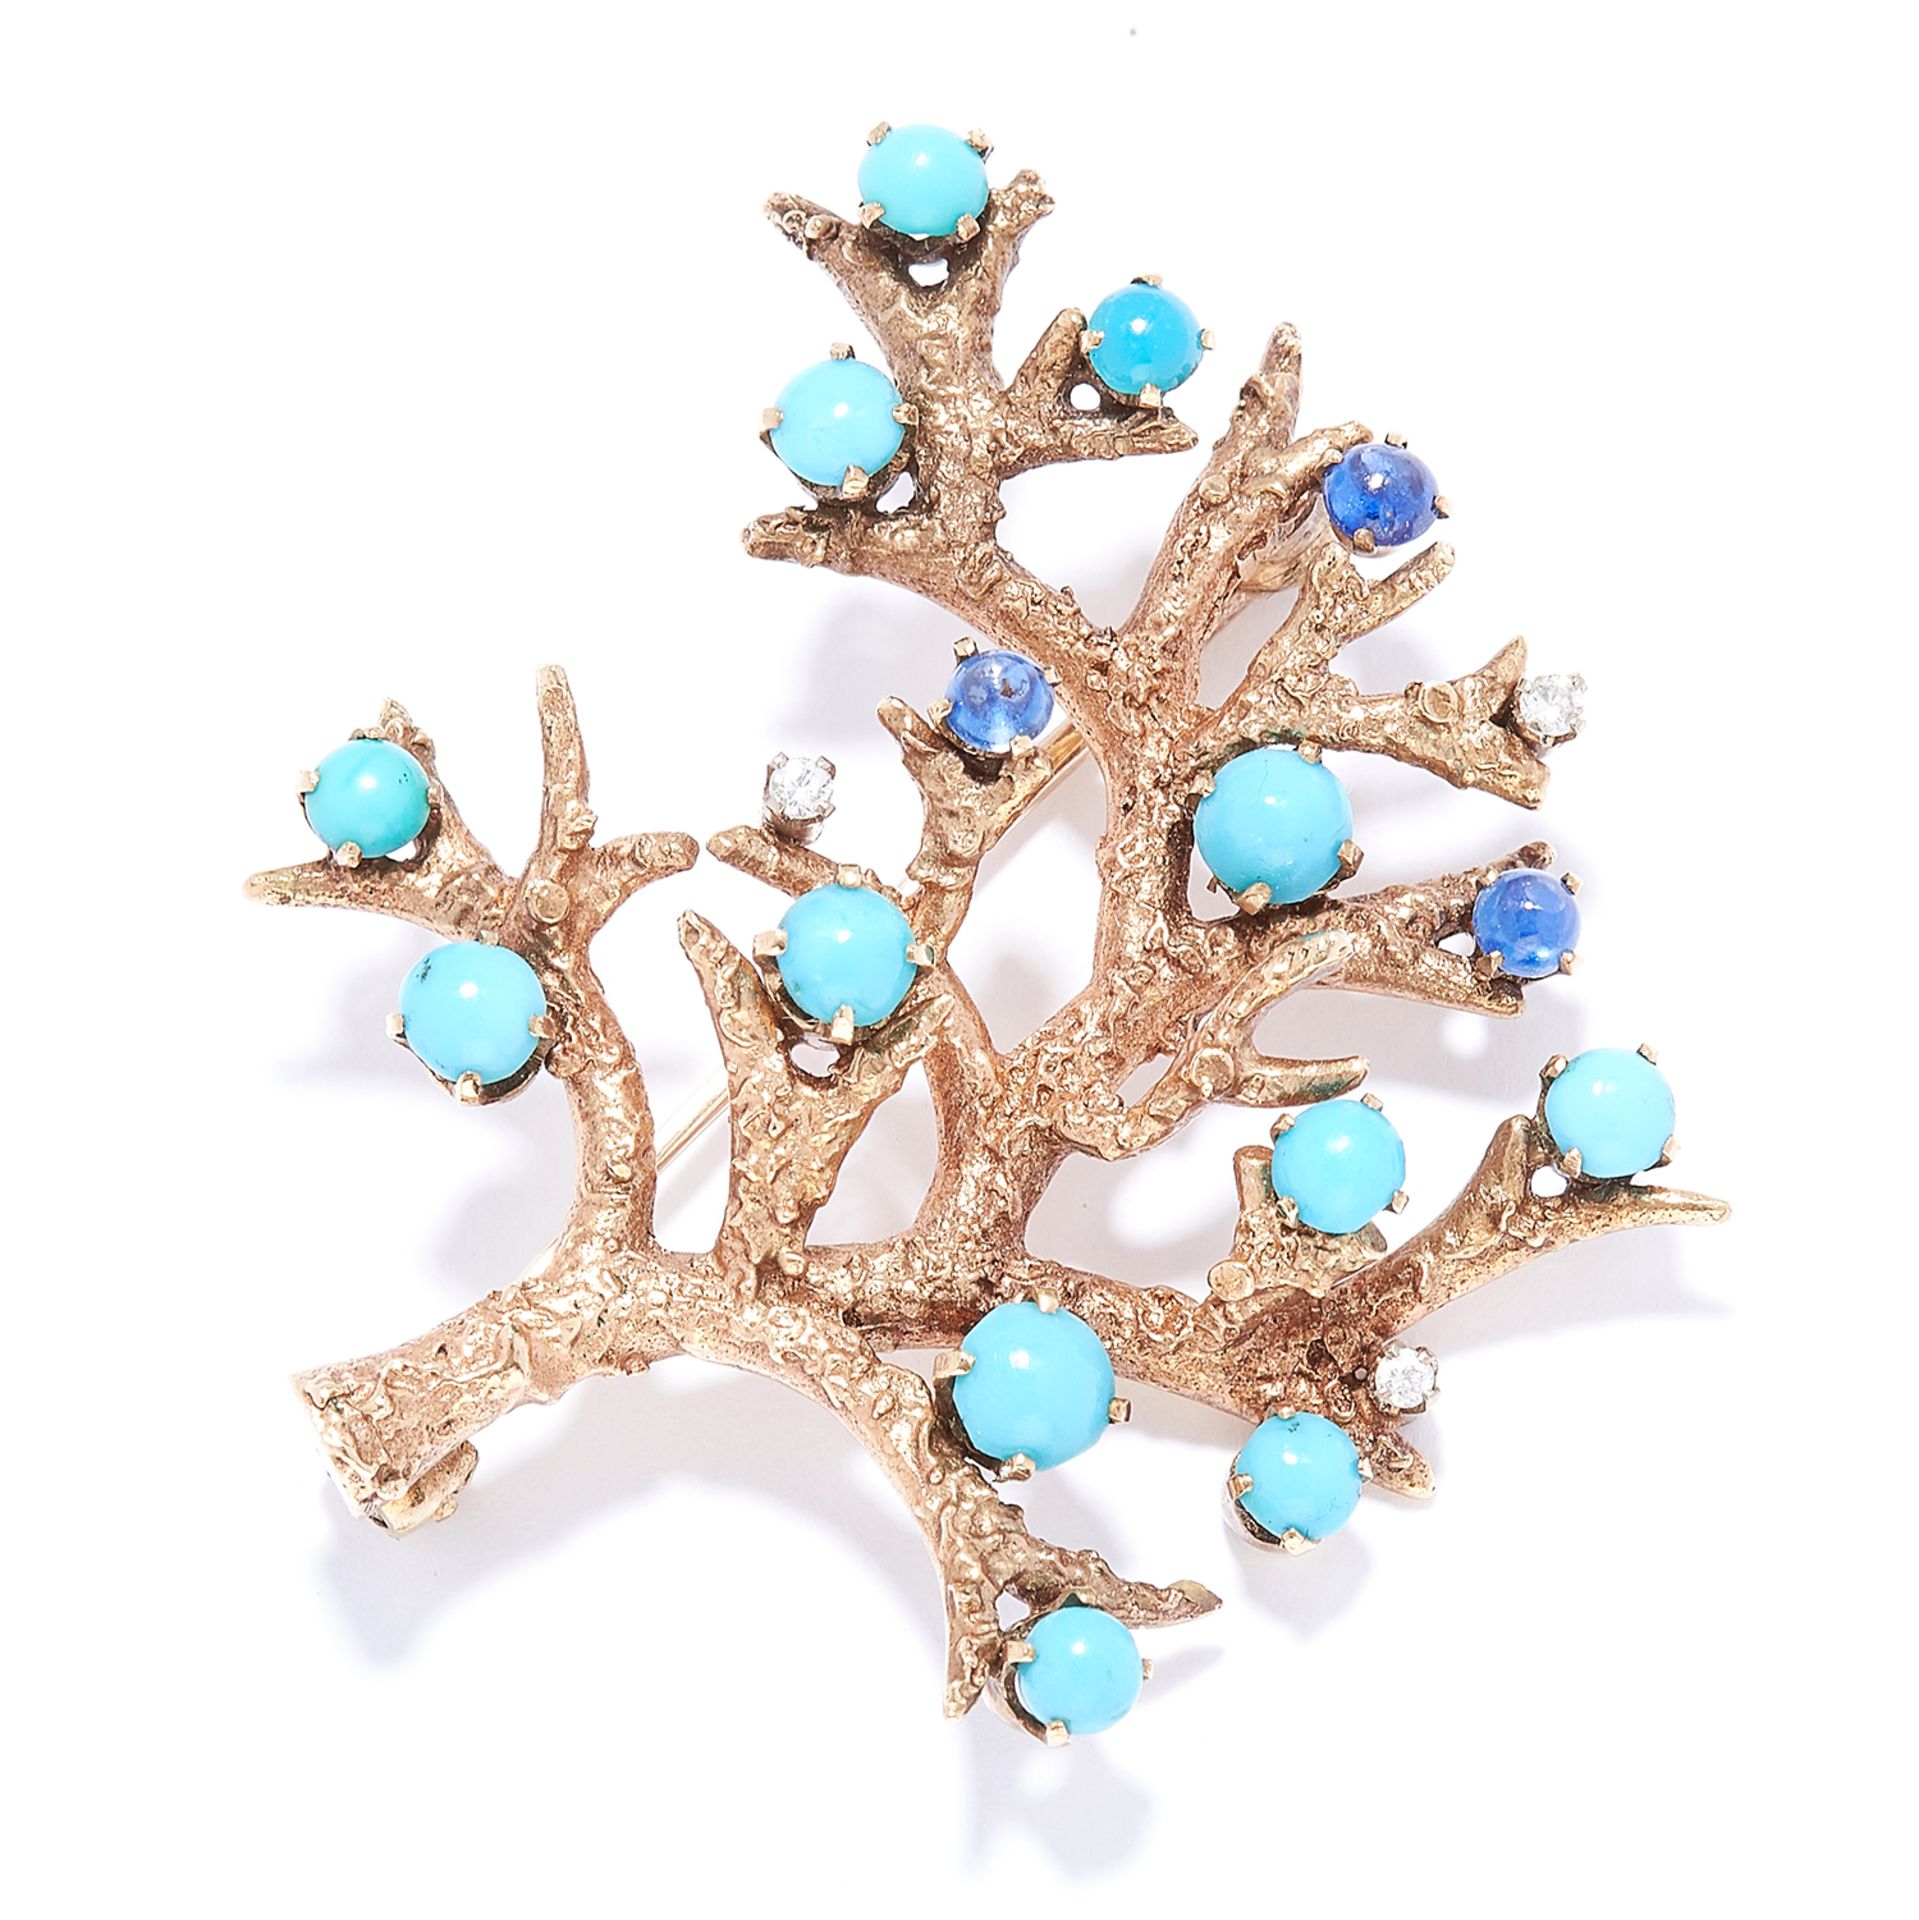 VINTAGE TURQUOISE, SAPPHIRE AND DIAMOND BRANCH BROOCH, H G MAUTNER, 1968 in the form of a branch set